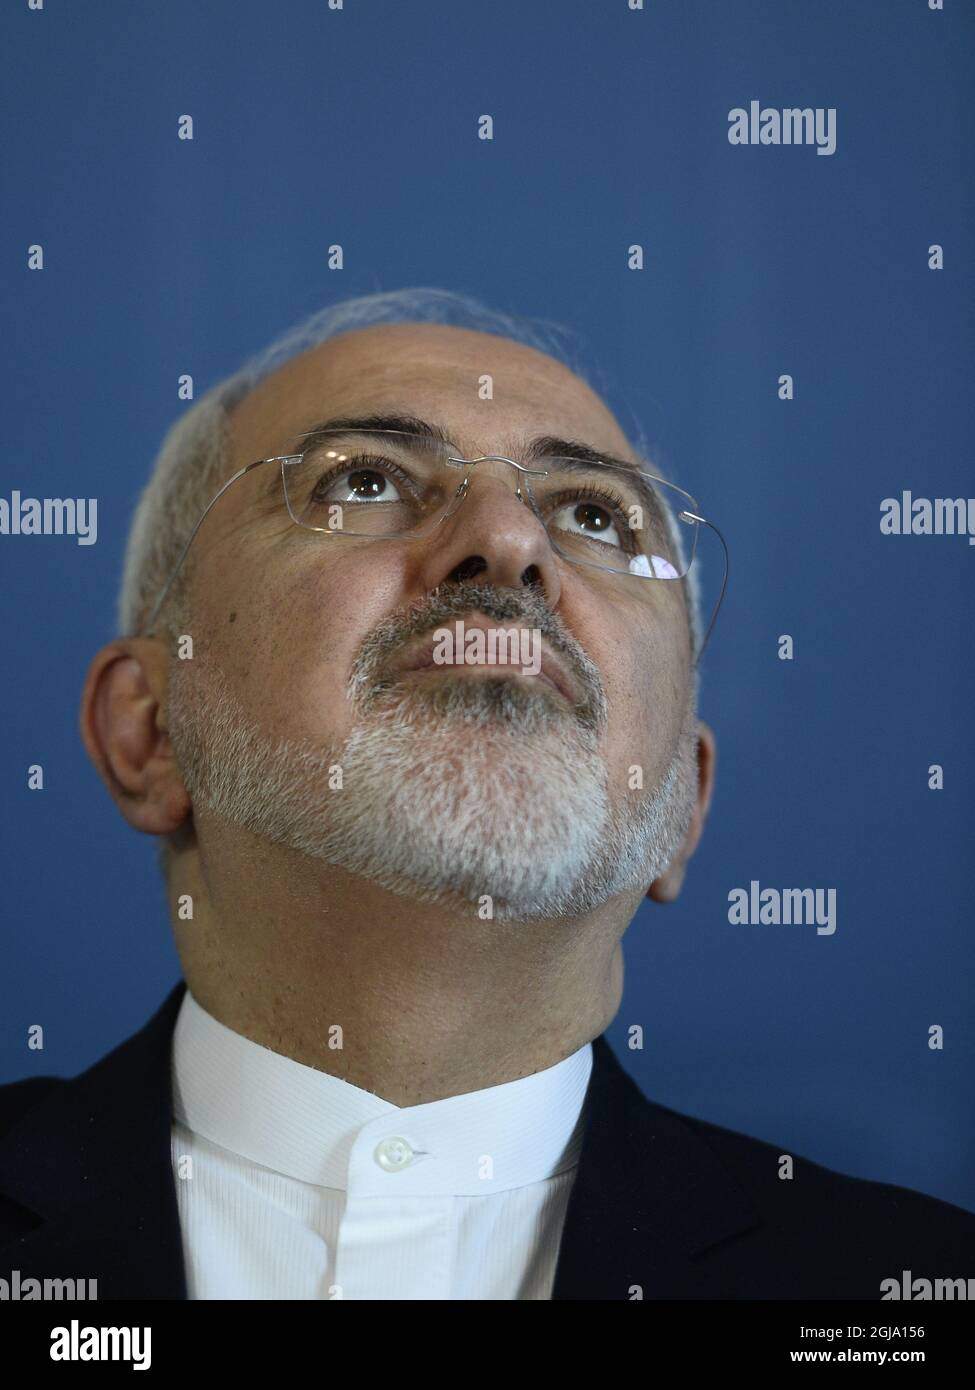 STOCKHOLM 2016-06-01 I The Minister of Foreign Affairs of Iran, Mr Mohammad Javad Zarif Khonsari is seen at a press conference at the Ministry of Foreign Affairs in Stockholm, Sweden, June 1, 2016 The Minister is in Sweden for bilateral talks with the Swedish government. Foto Maja Suslin / TT kod 10300 Stock Photo